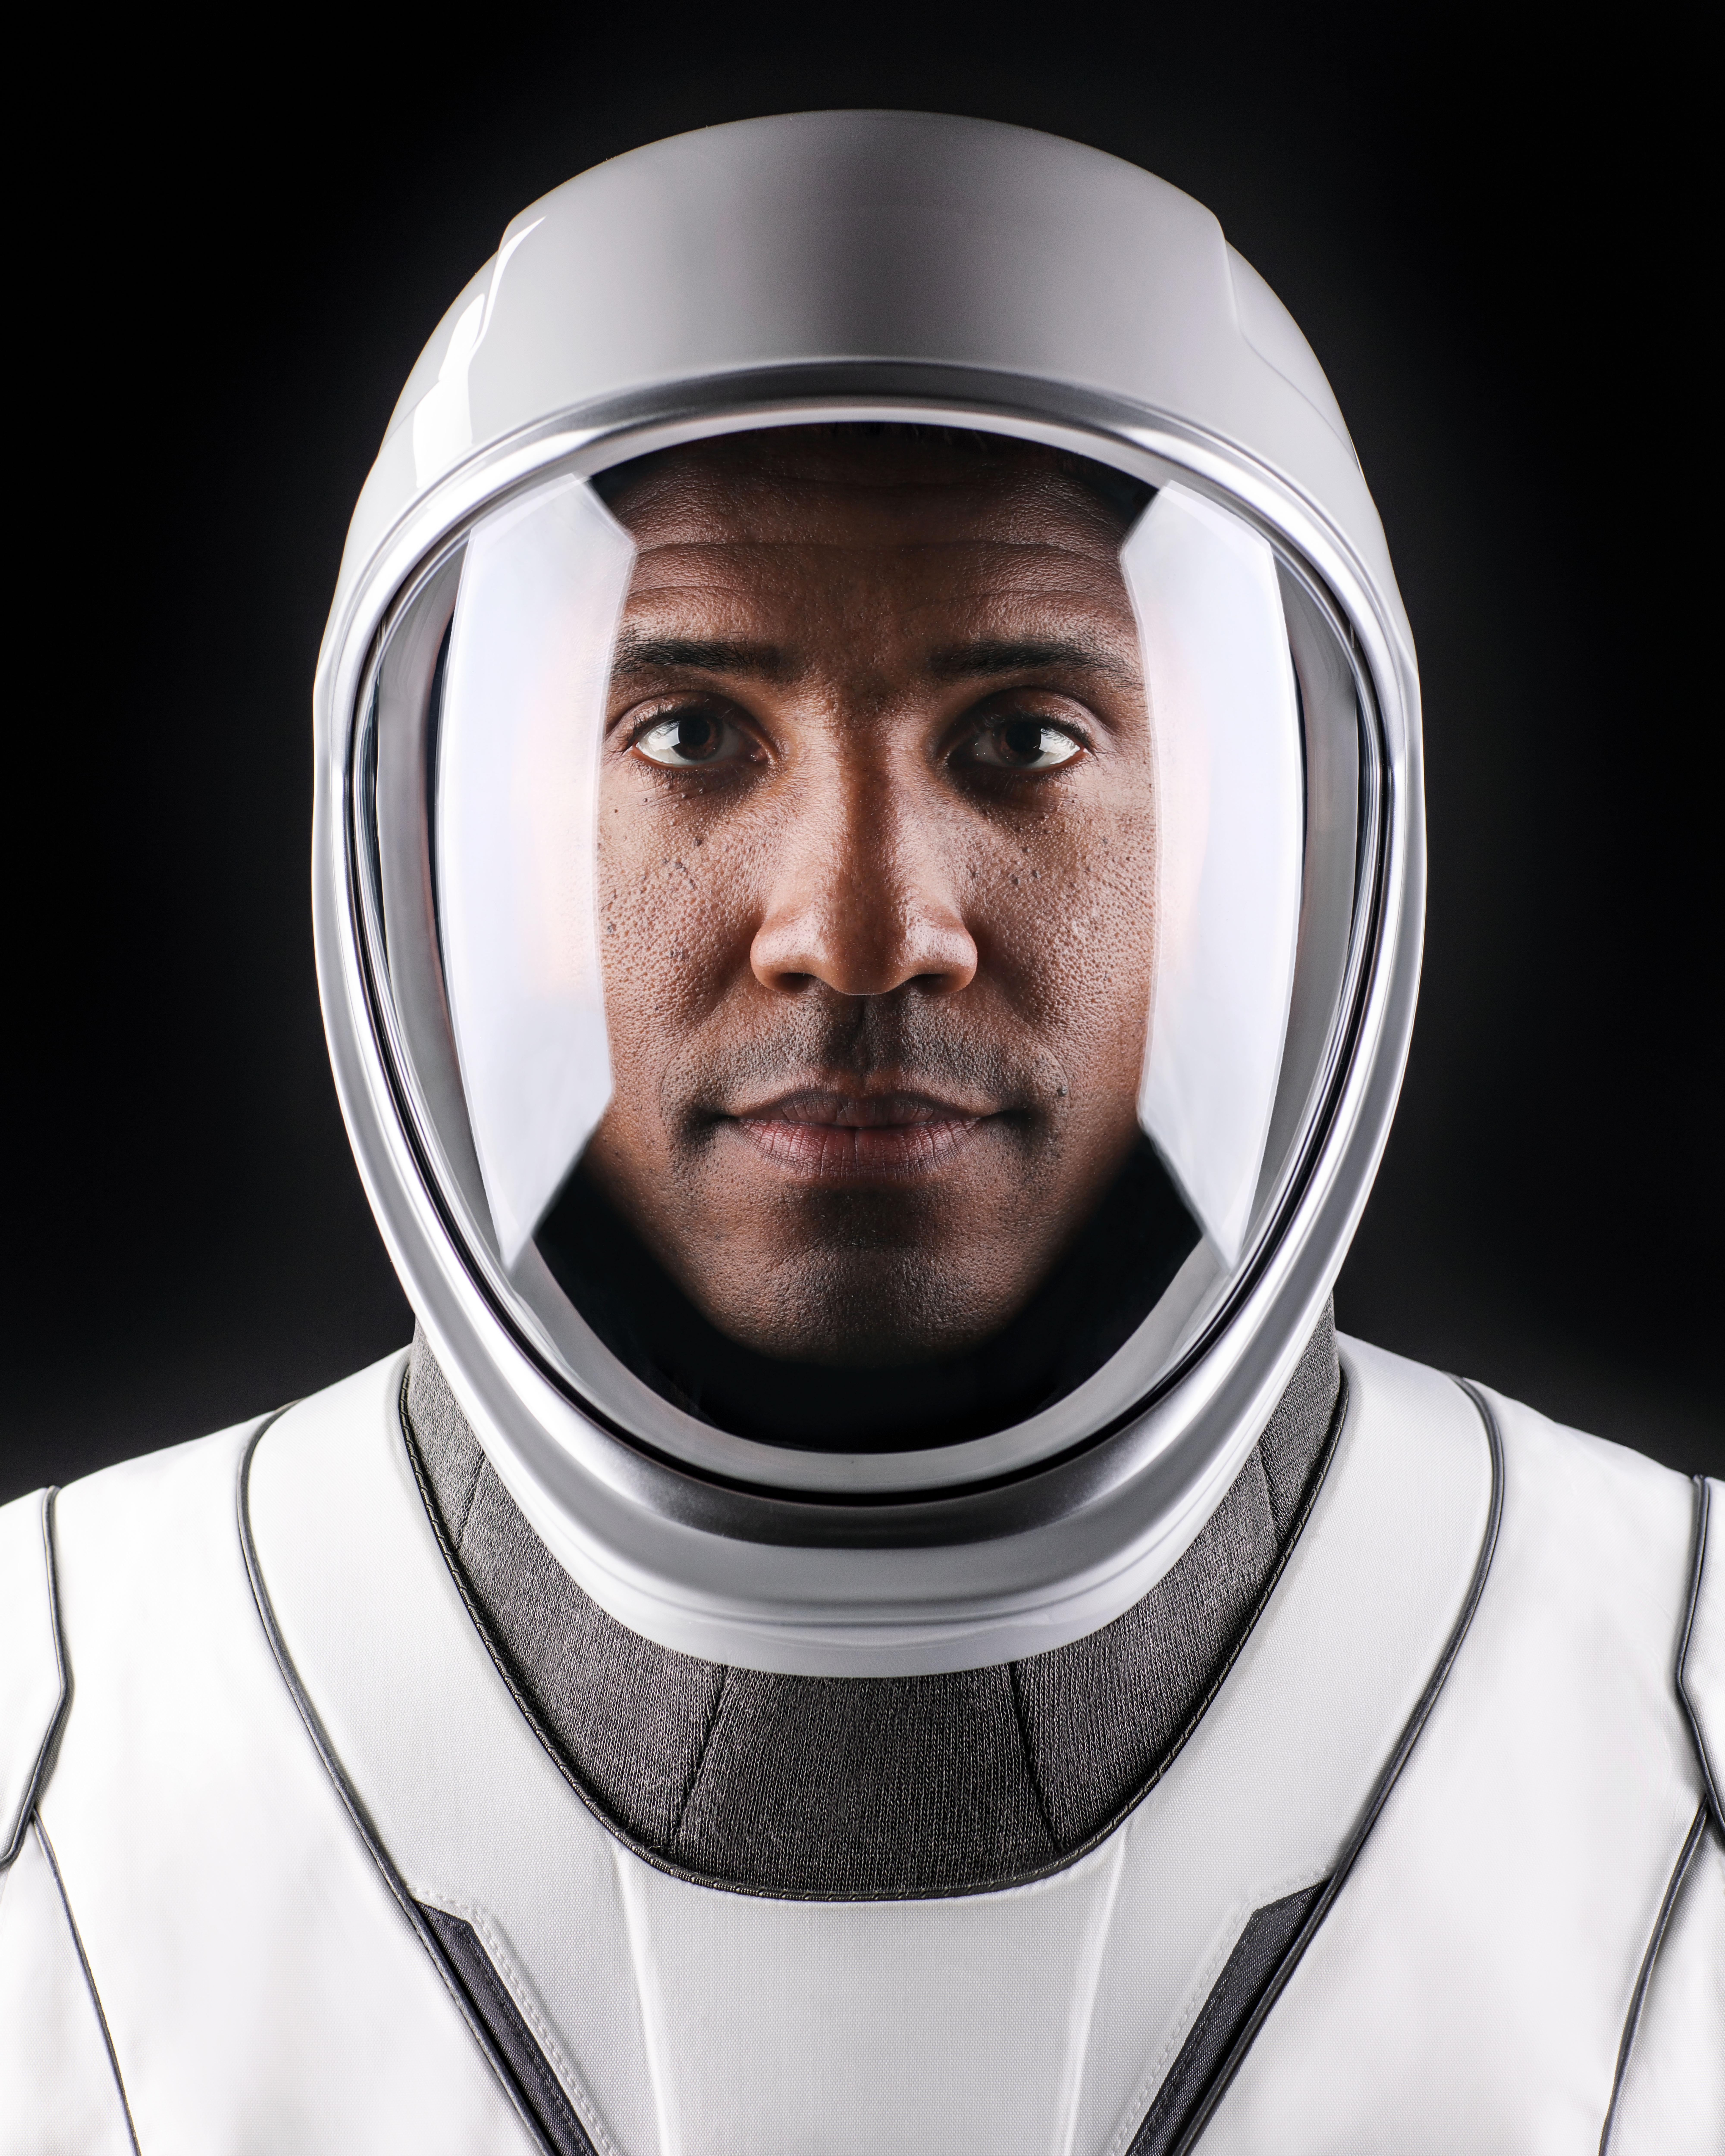 NASA's SpaceX Crew-1 Pilot Victor Glover is photographed in his SpaceX spacesuit.